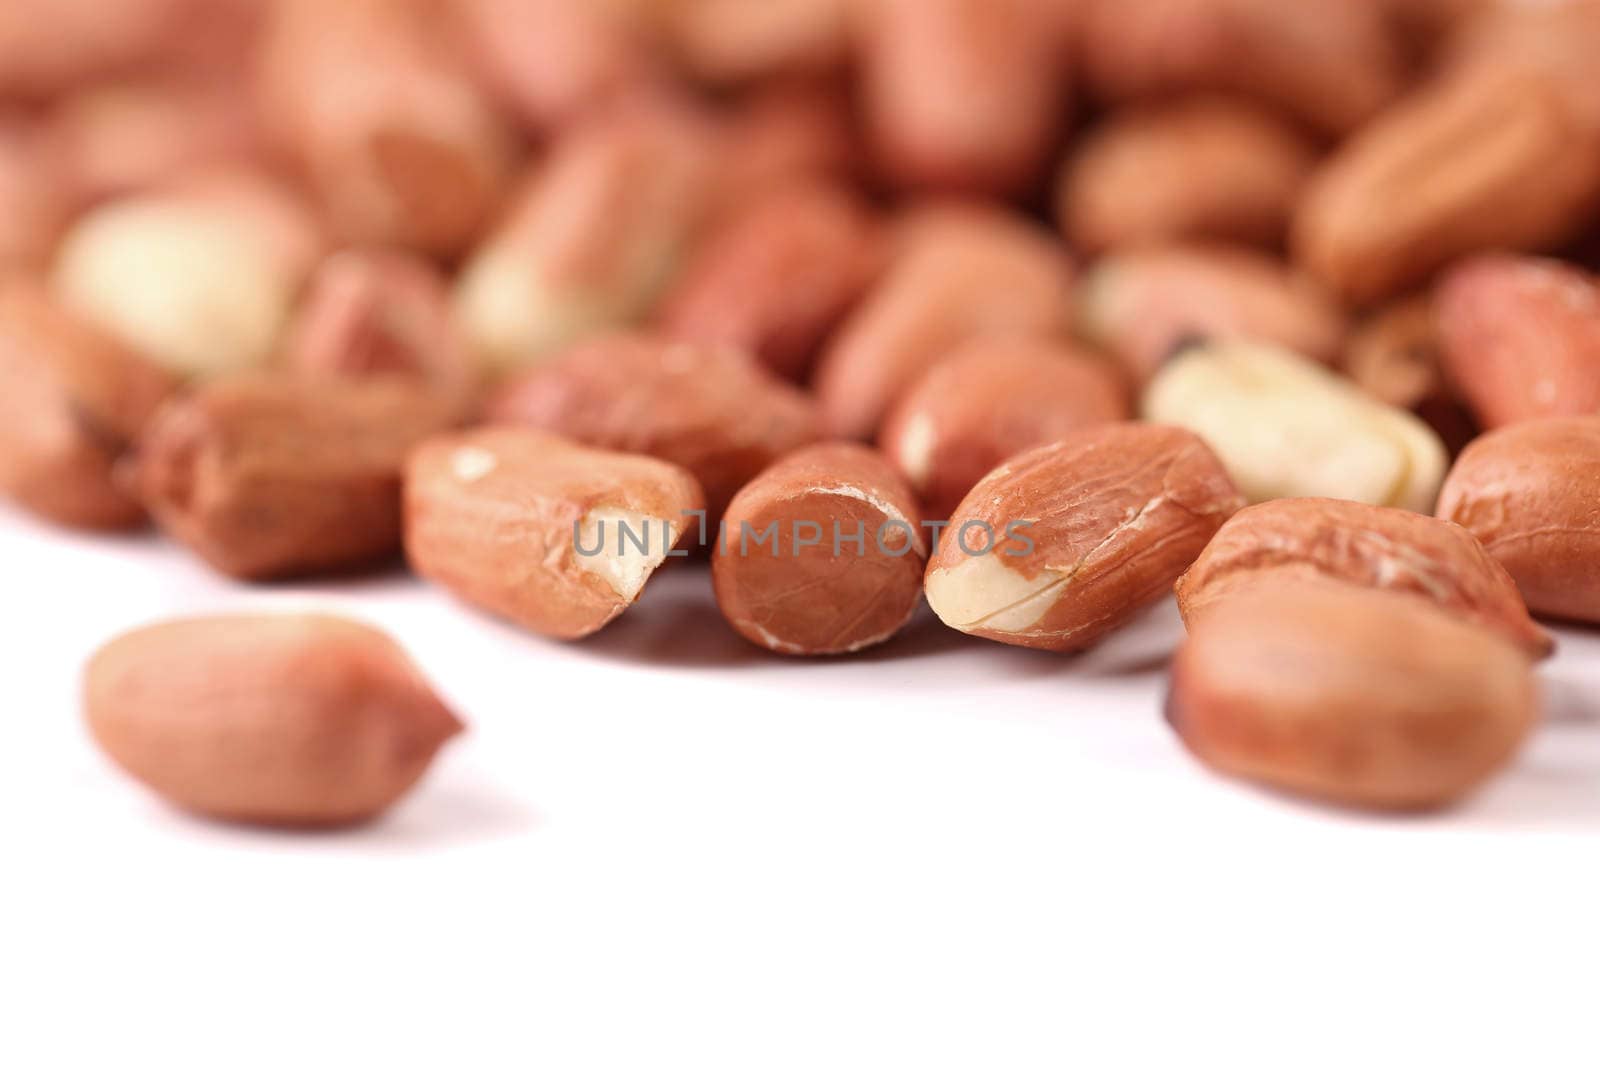 Extreme close-up image of peanuts on the white background